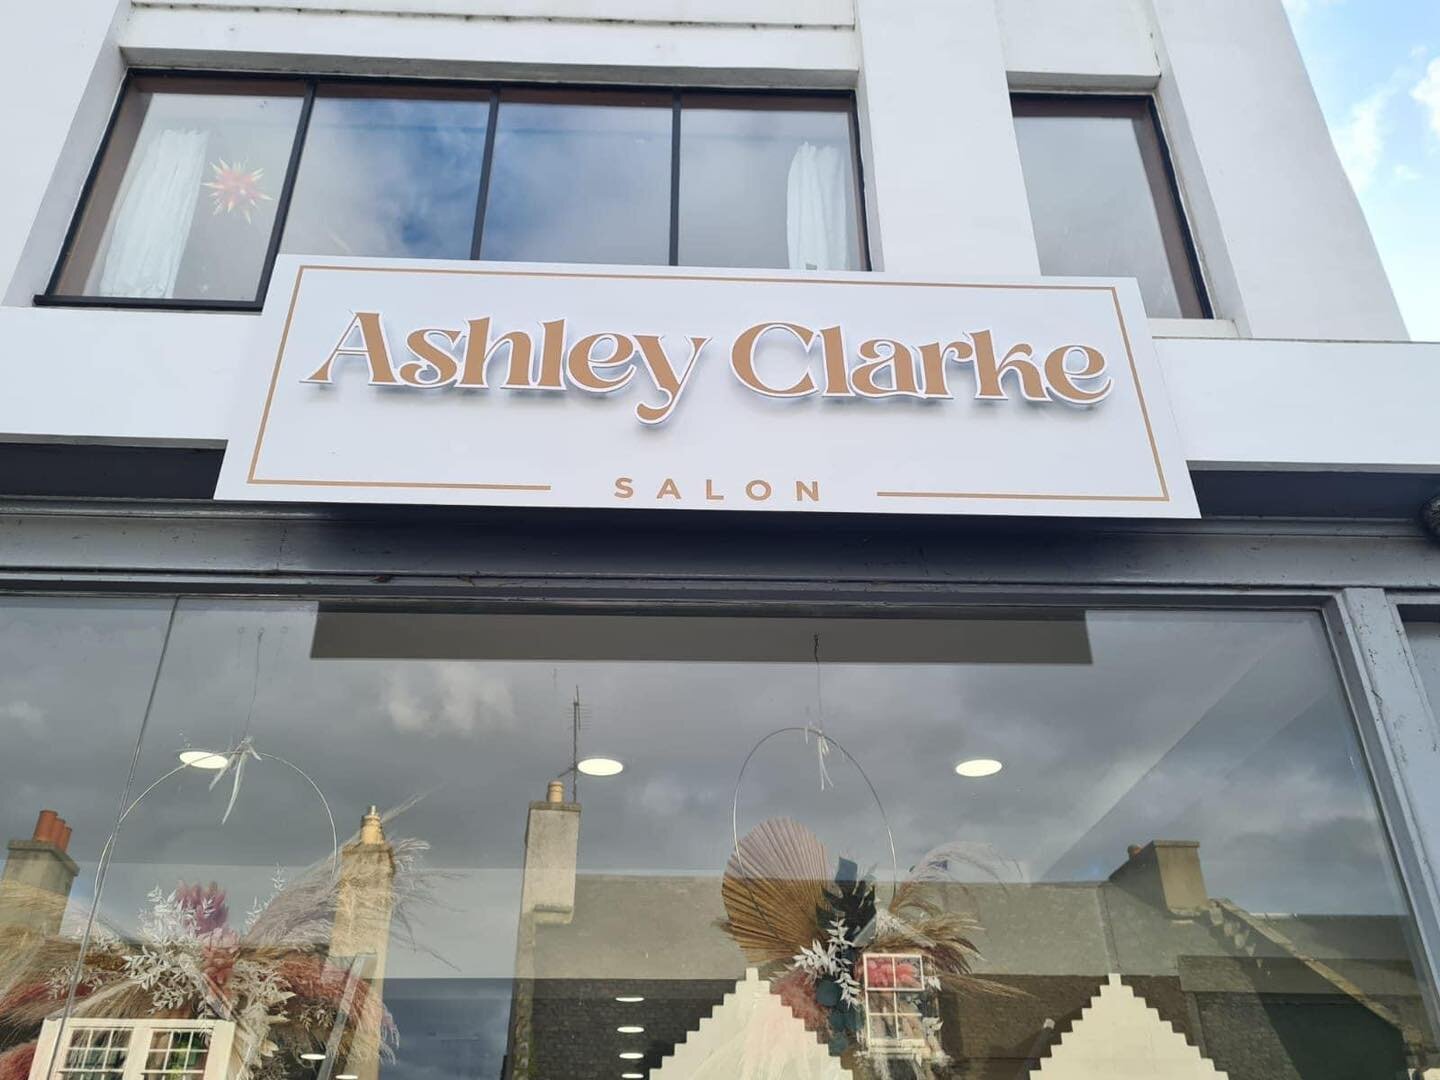 We love a re brand 🤎 What do you think of our new look? Shout out to @johnyounggroupltd for our new signage! 

#ashleyclarkesignaturesalon #rebrand #ournewlook #southqueensferry #southqueensferrysalon #salondecor